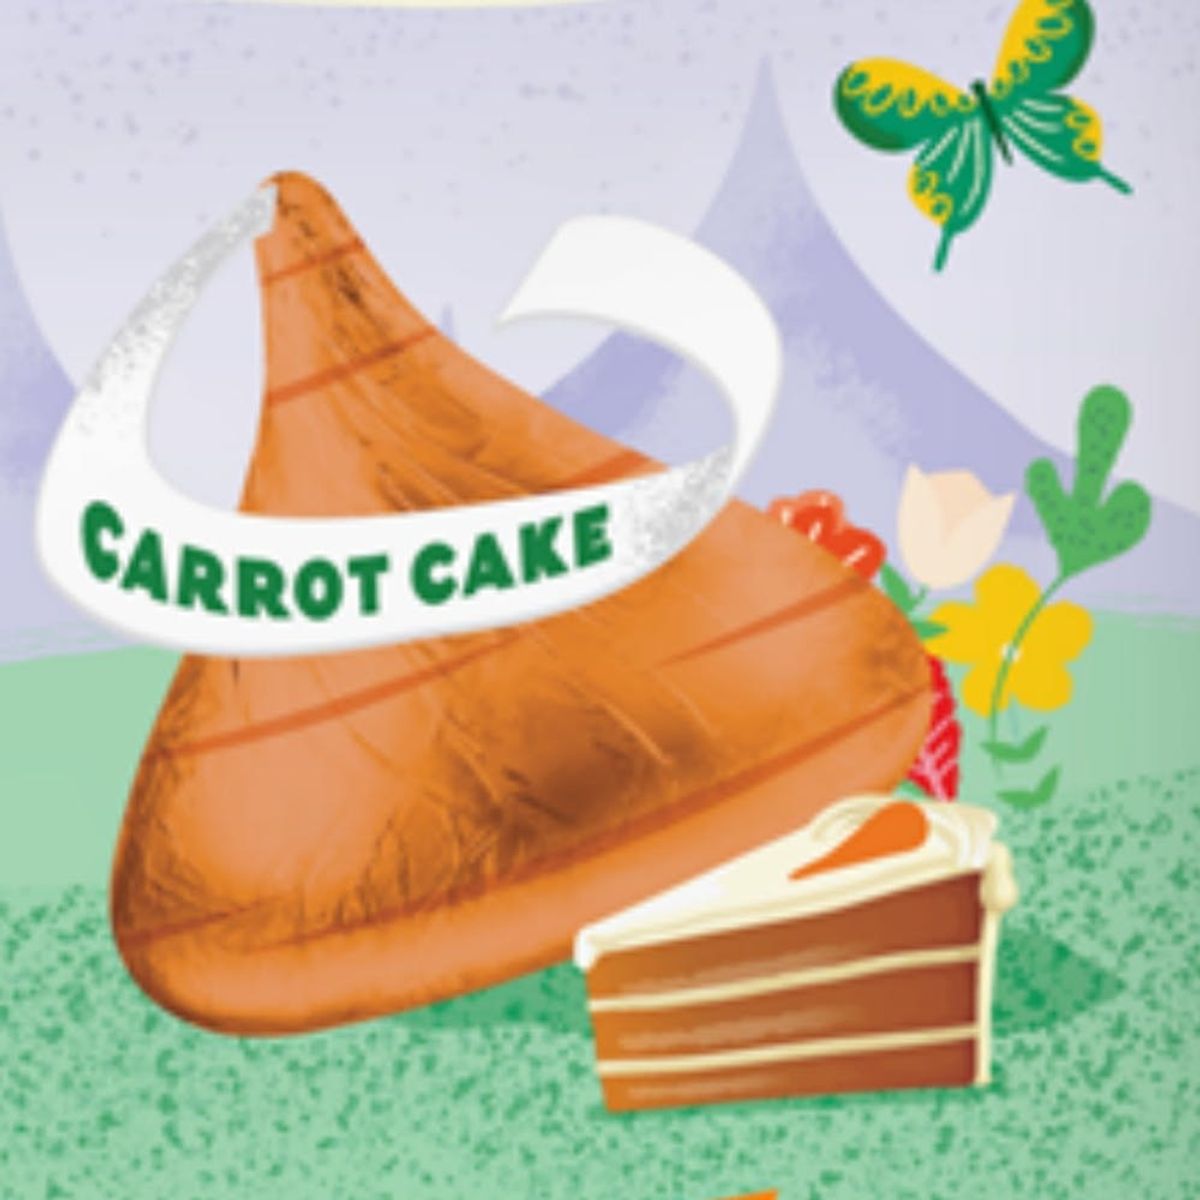 Easter Just Got Yummier With Hershey’s New Carrot Cake Kisses